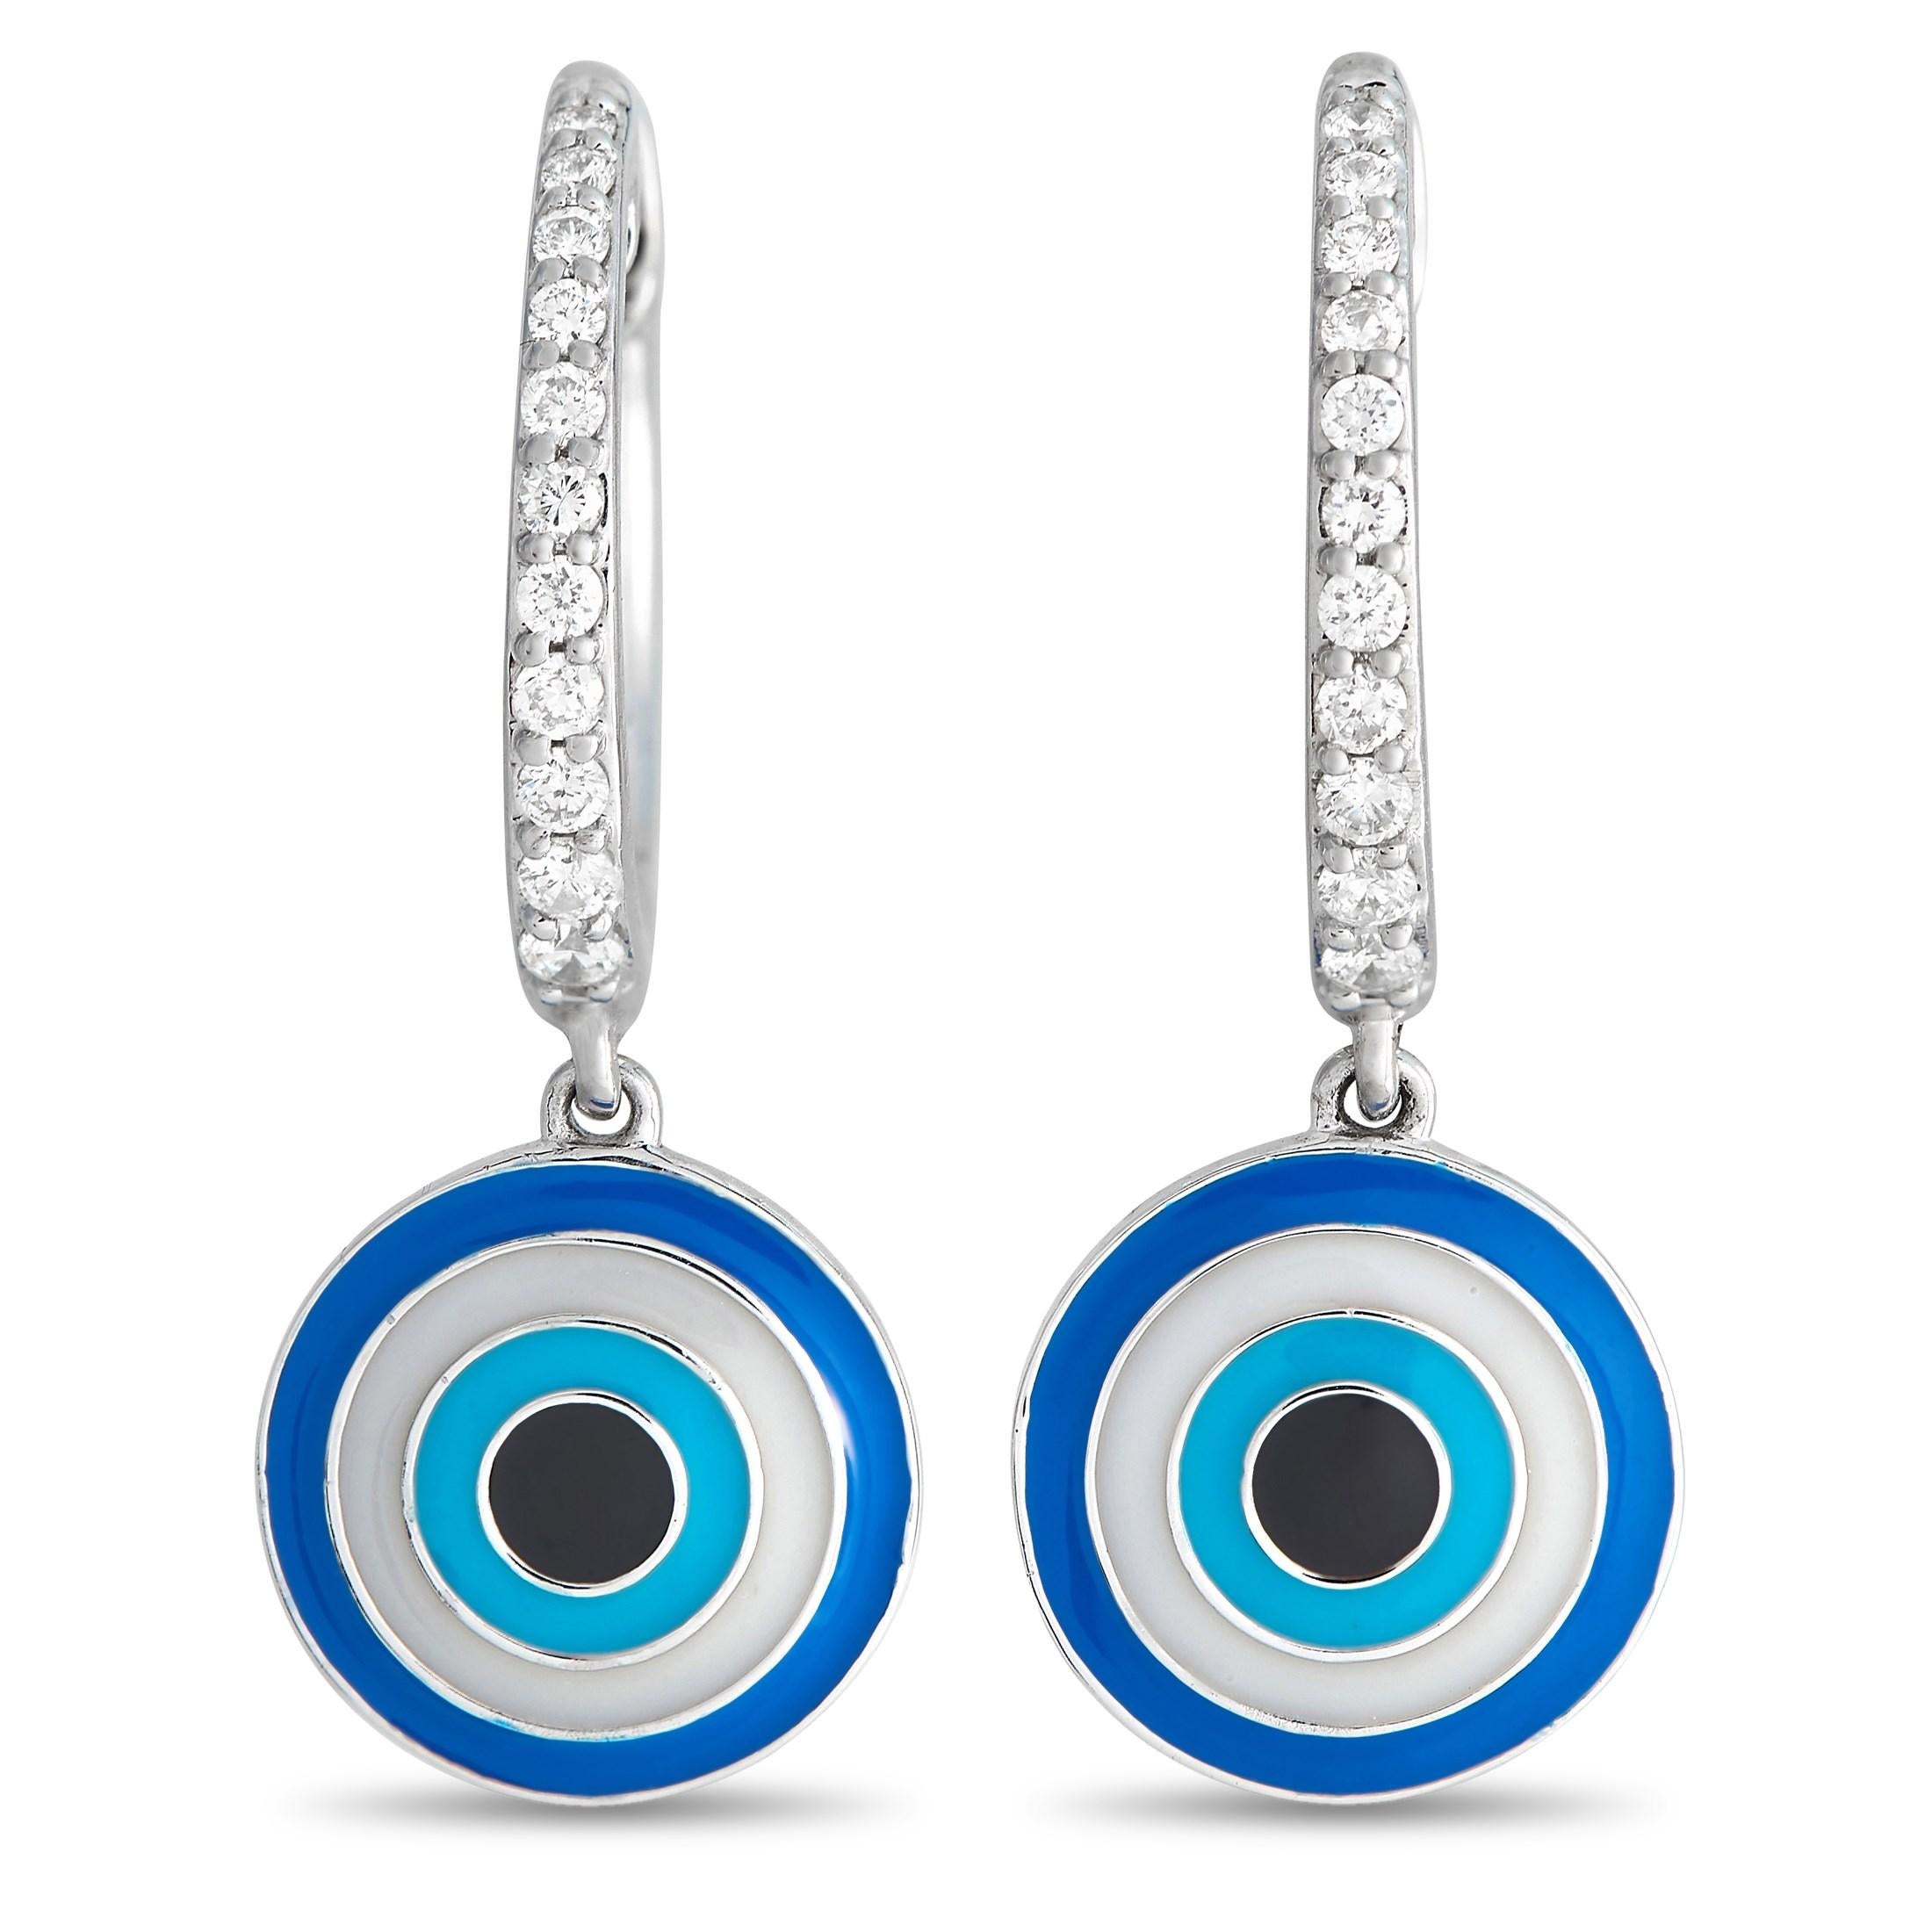 Keep the bad vibes at bay with this pair of sparkling diamond earrings with an evil eye accent. The 14K white gold huggie earrings have their front face lined with diamonds. Dropping softly from each huggie is a round evil-eye-inspired dangler in